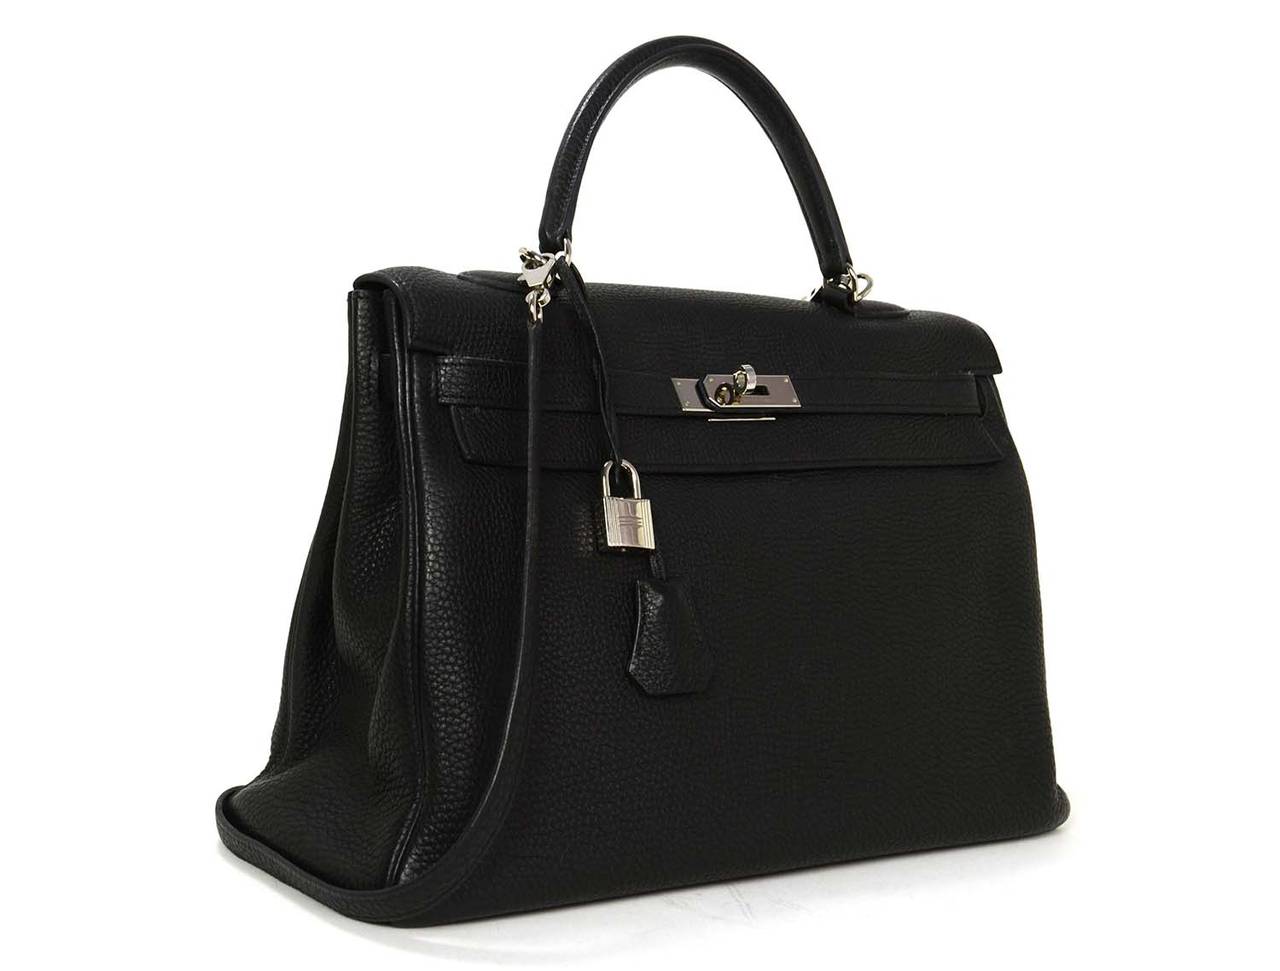 This iconic bag is finely crafted of togo leather in classic black and features a sturdy reinforced leather top handle, a frontal flap, optional shoulder strap and palladium hardware. This chic handbag is a beautiful compliment to any day or evening